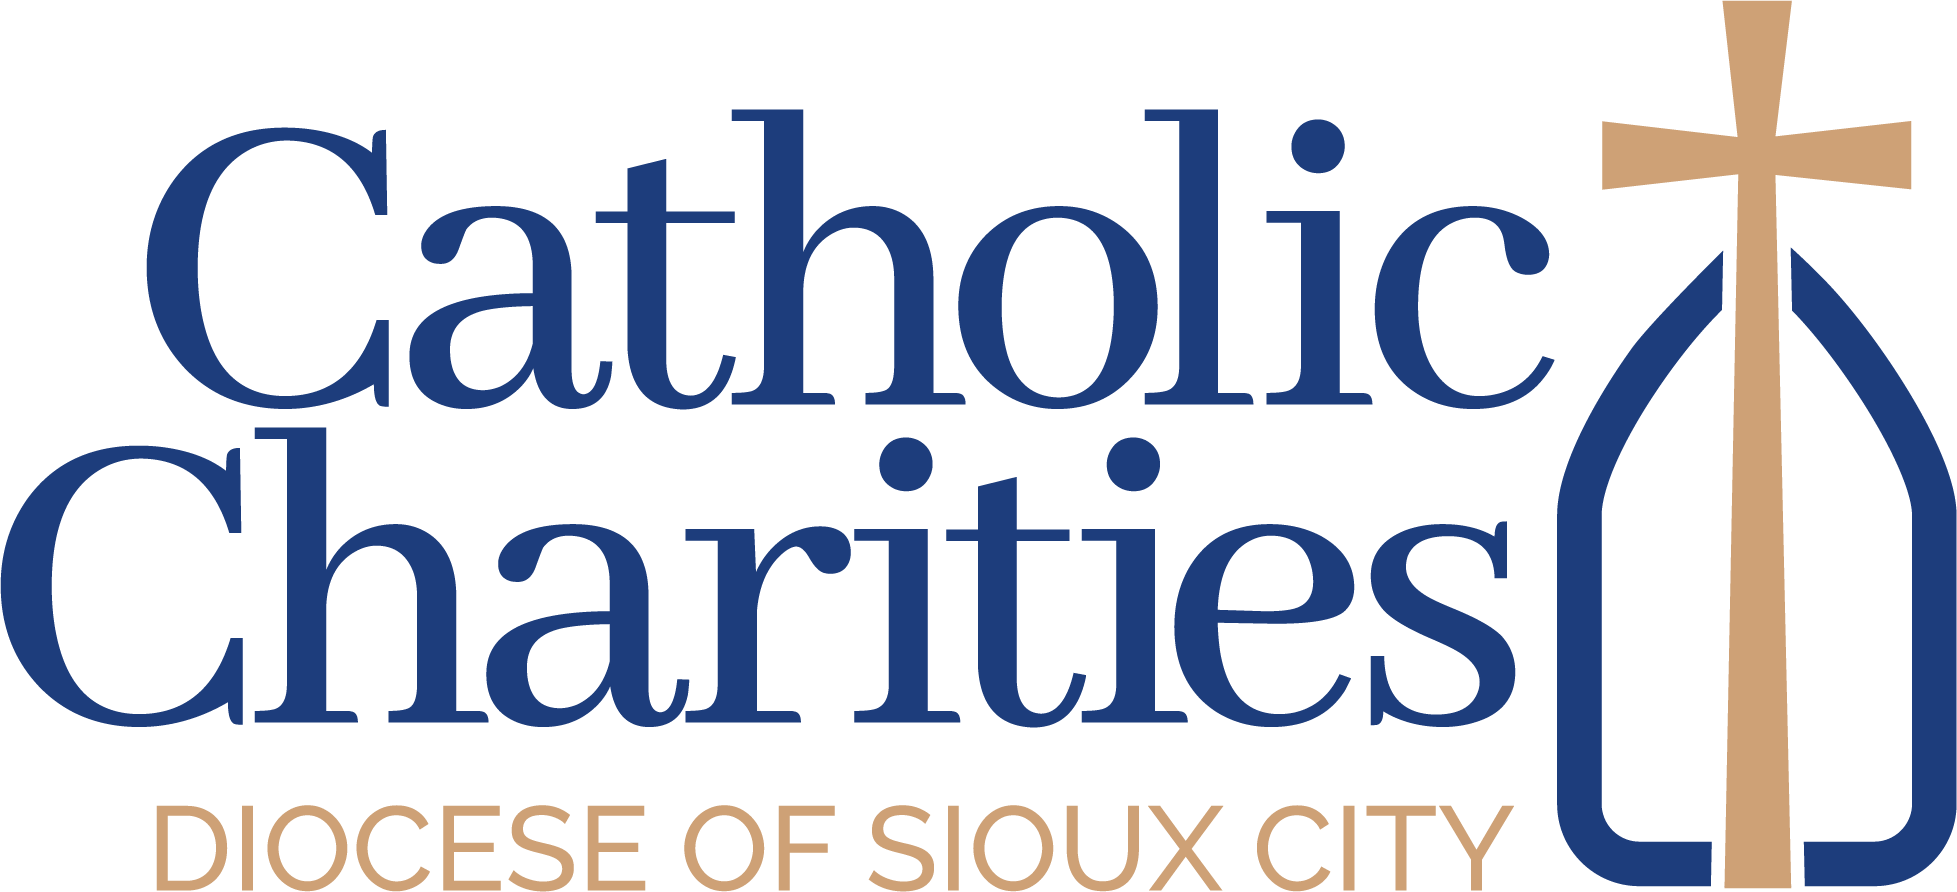 Catholic Charities of the Diocese of Sioux City - Fort Dodge Office's Image